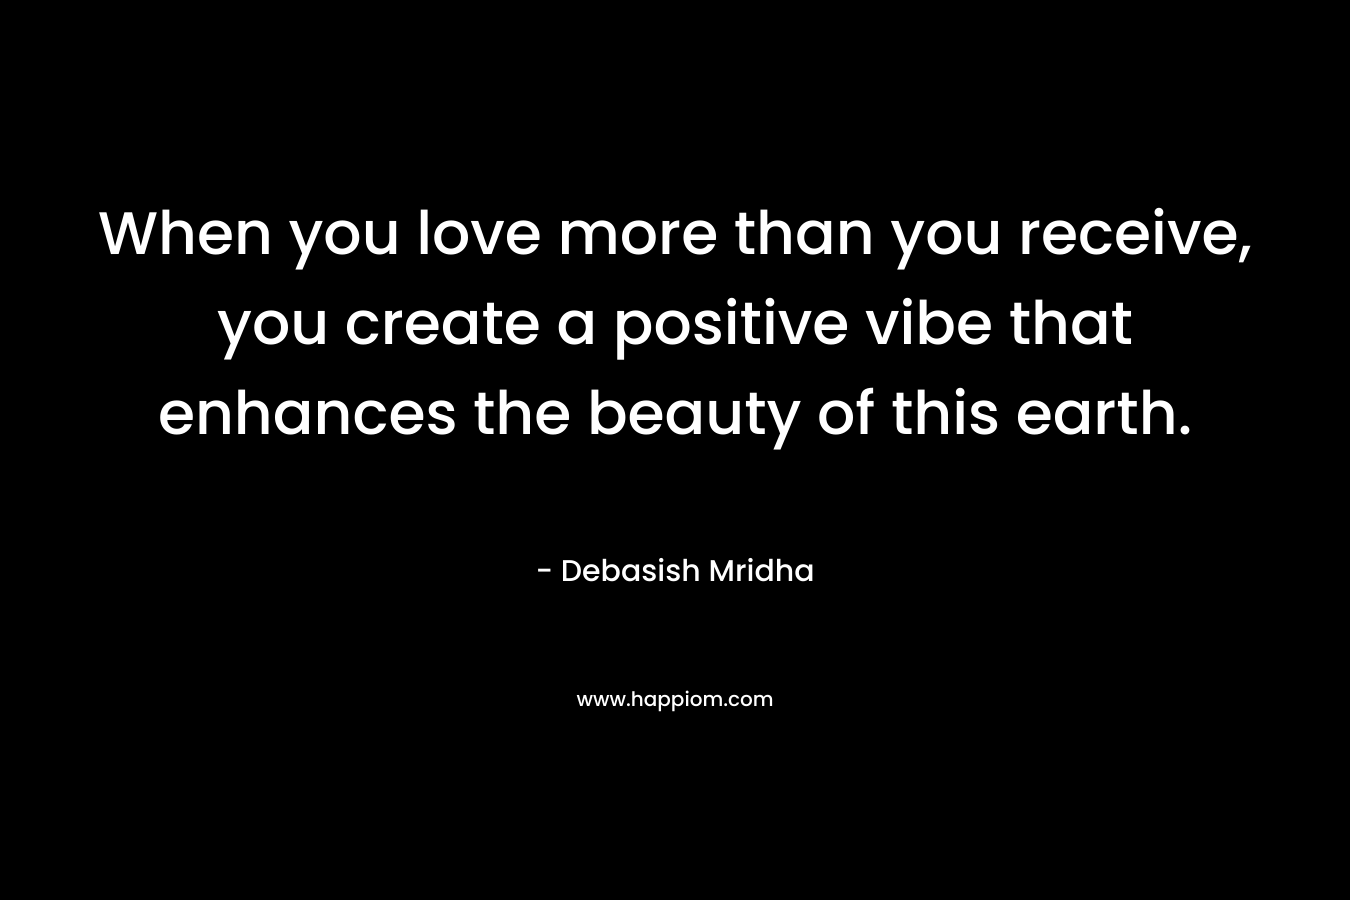 When you love more than you receive, you create a positive vibe that enhances the beauty of this earth.